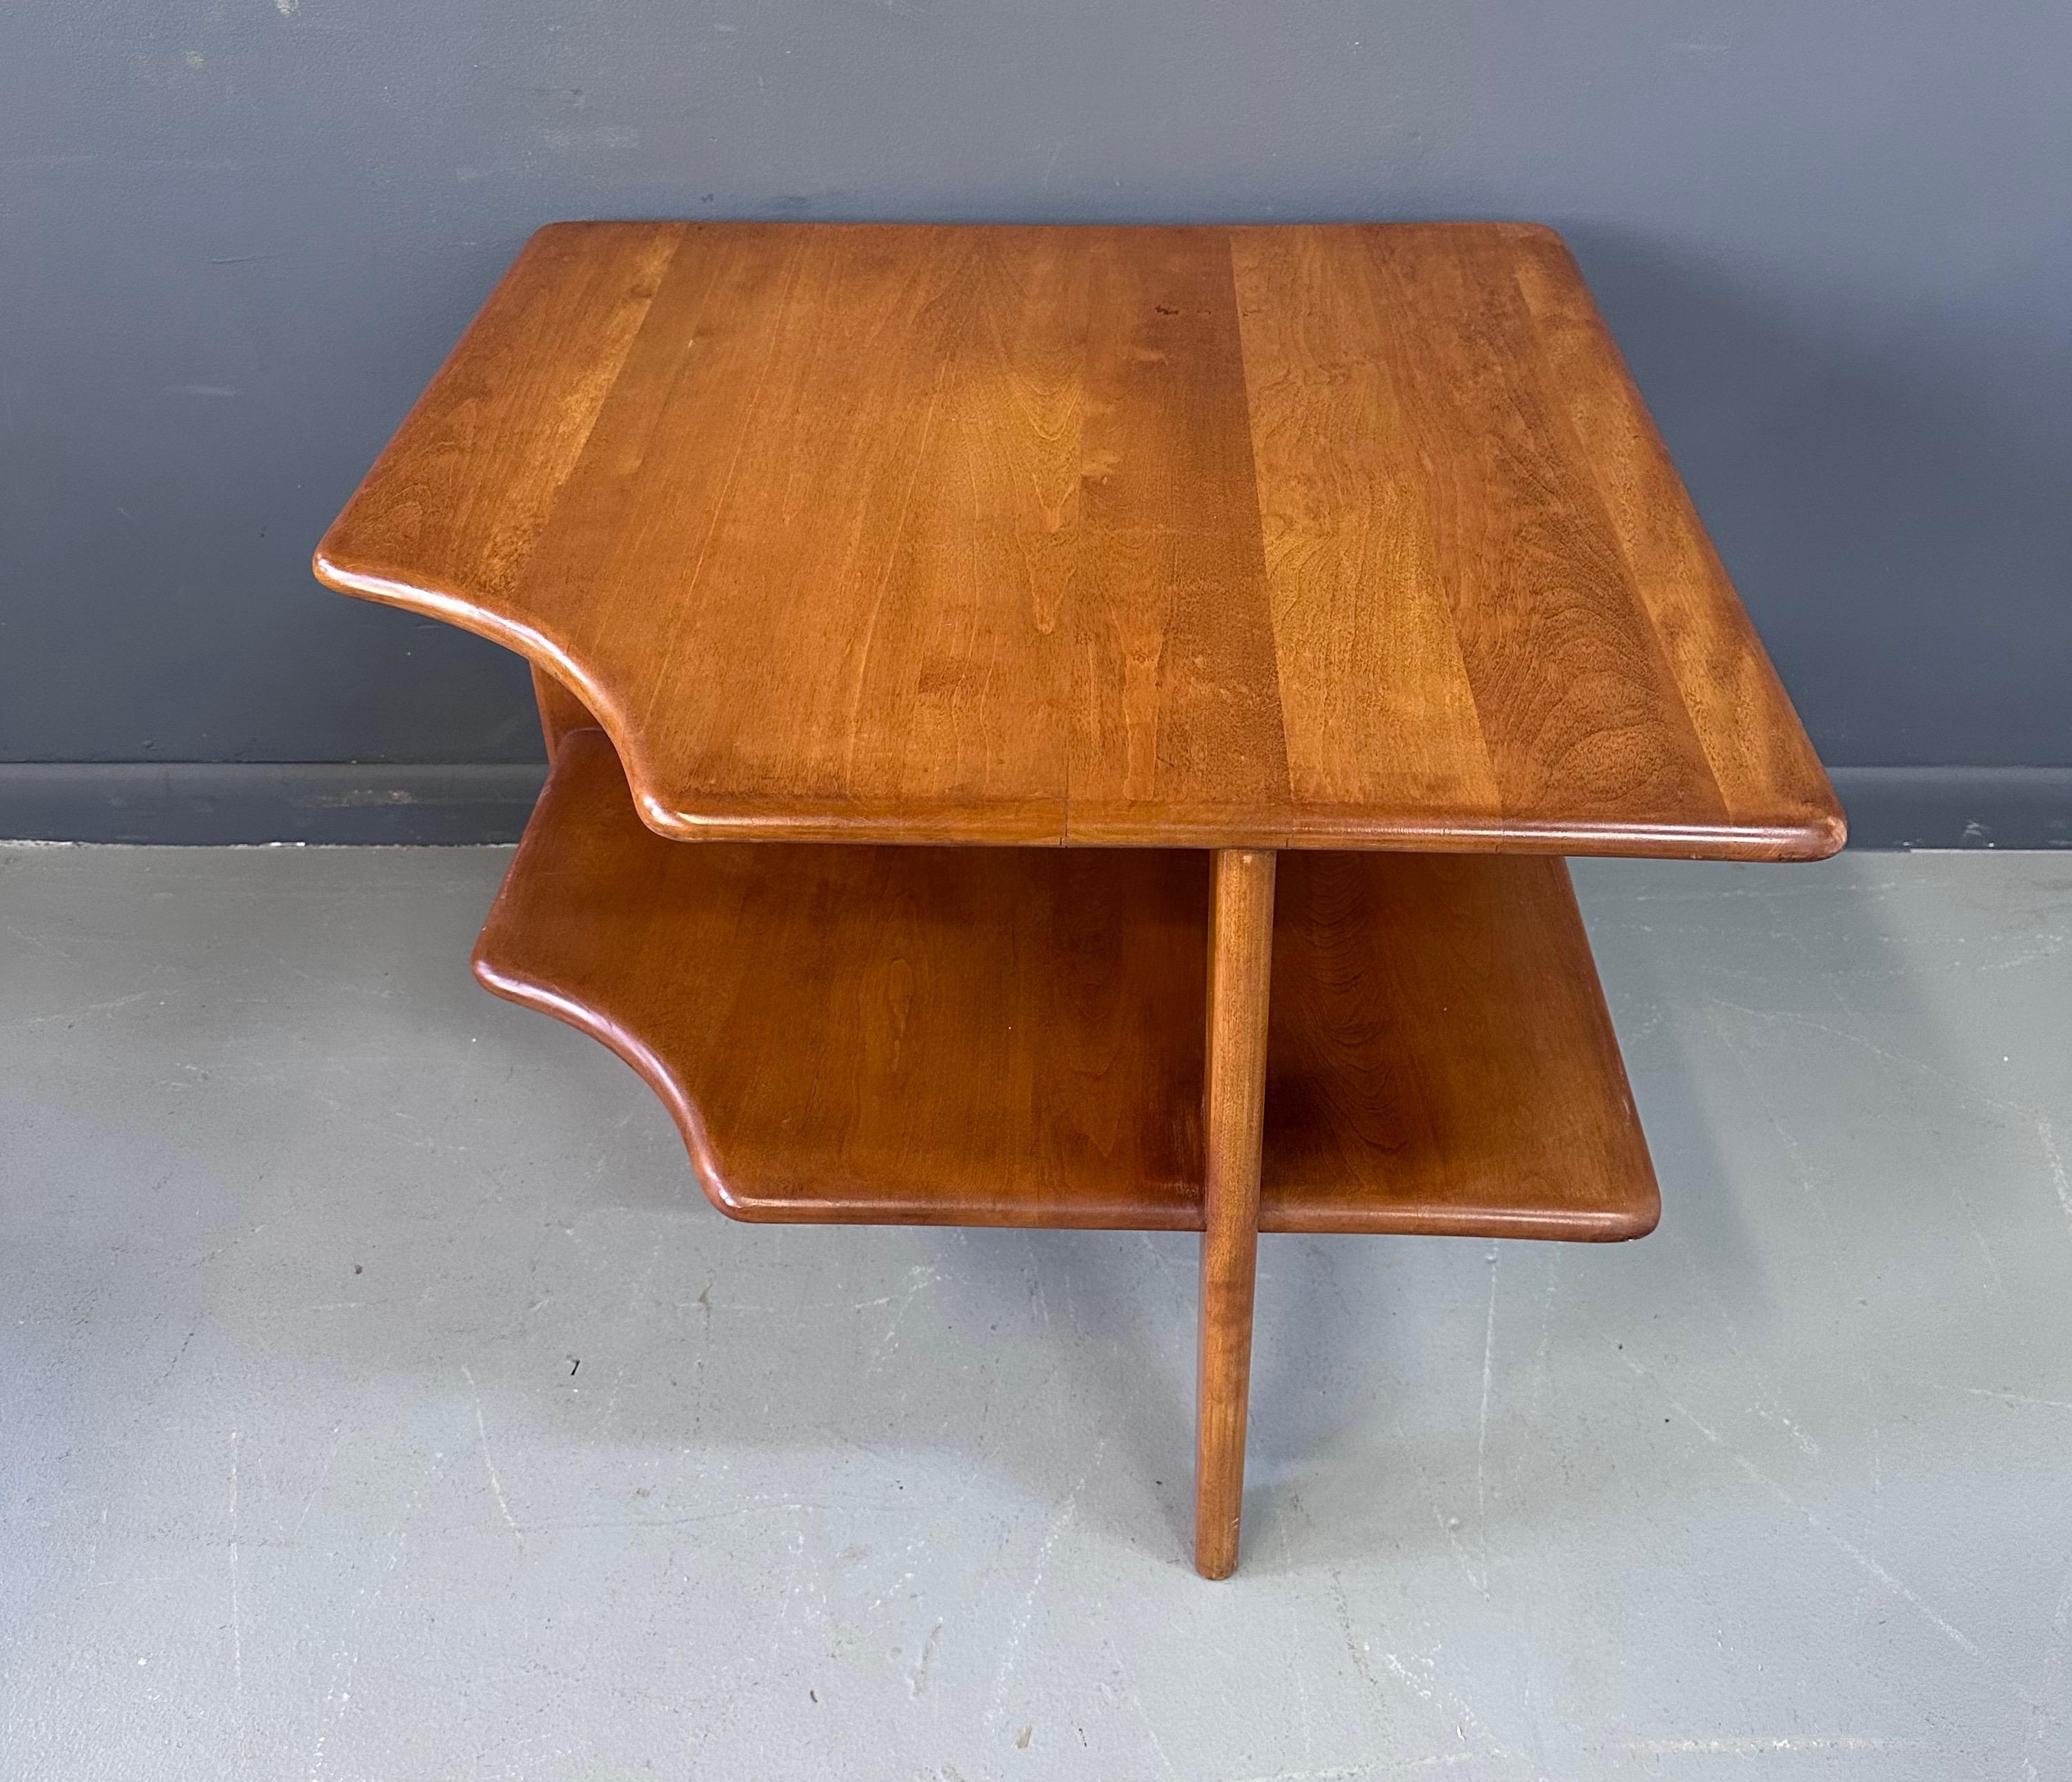 Sculptural, Mid-Century Modern, tiered maple, corner side table by Russel Wright for Conant ball features a carved edge to create a corner in between sofas or chairs. The bottom tier is 12 inches height.